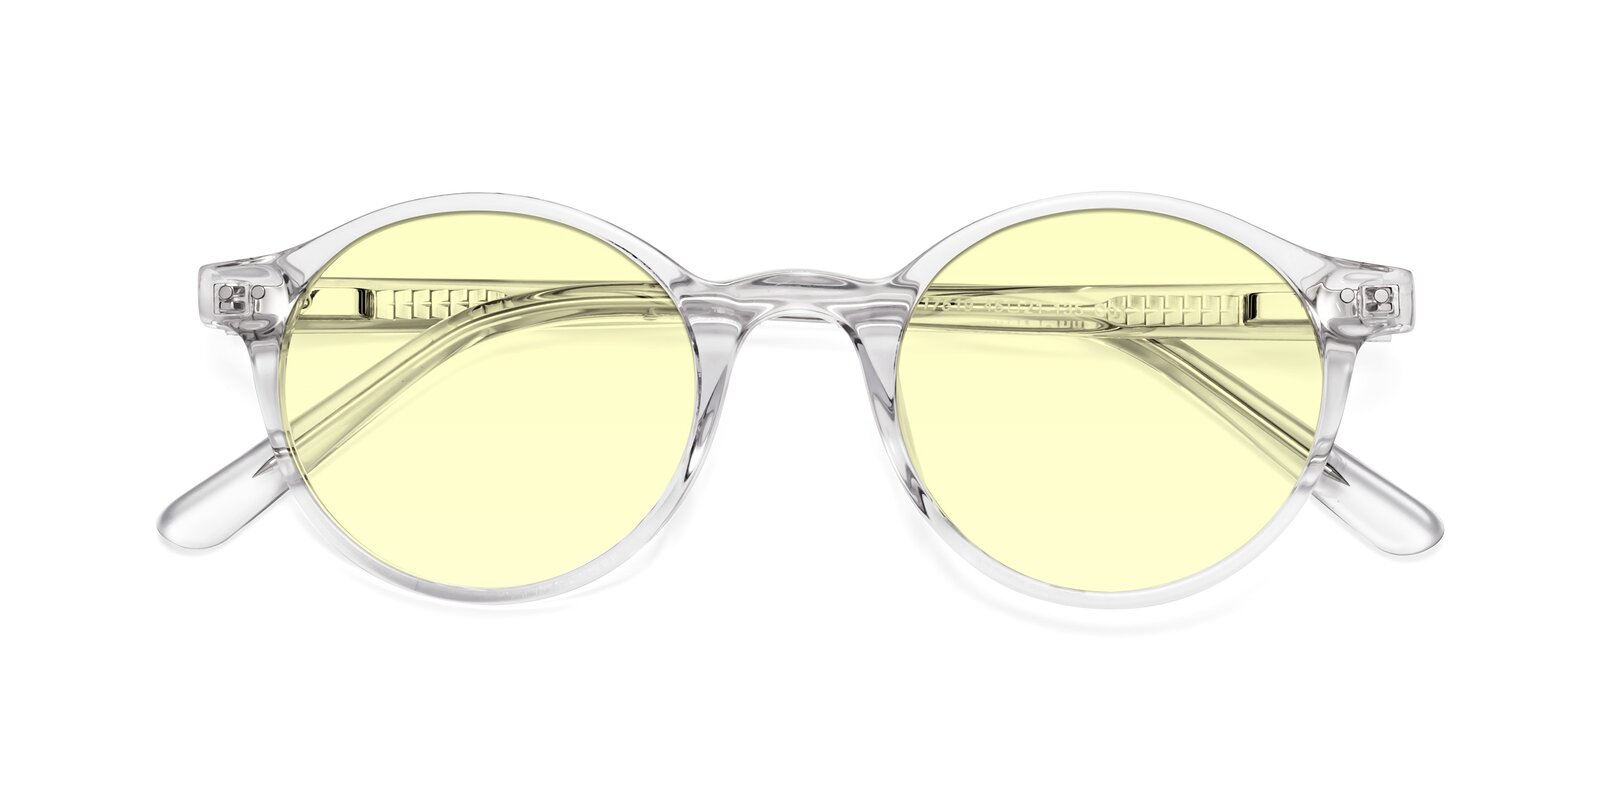 Clear Narrow Acetate Round Tinted Sunglasses With Light Yellow Sunwear Lenses 17519